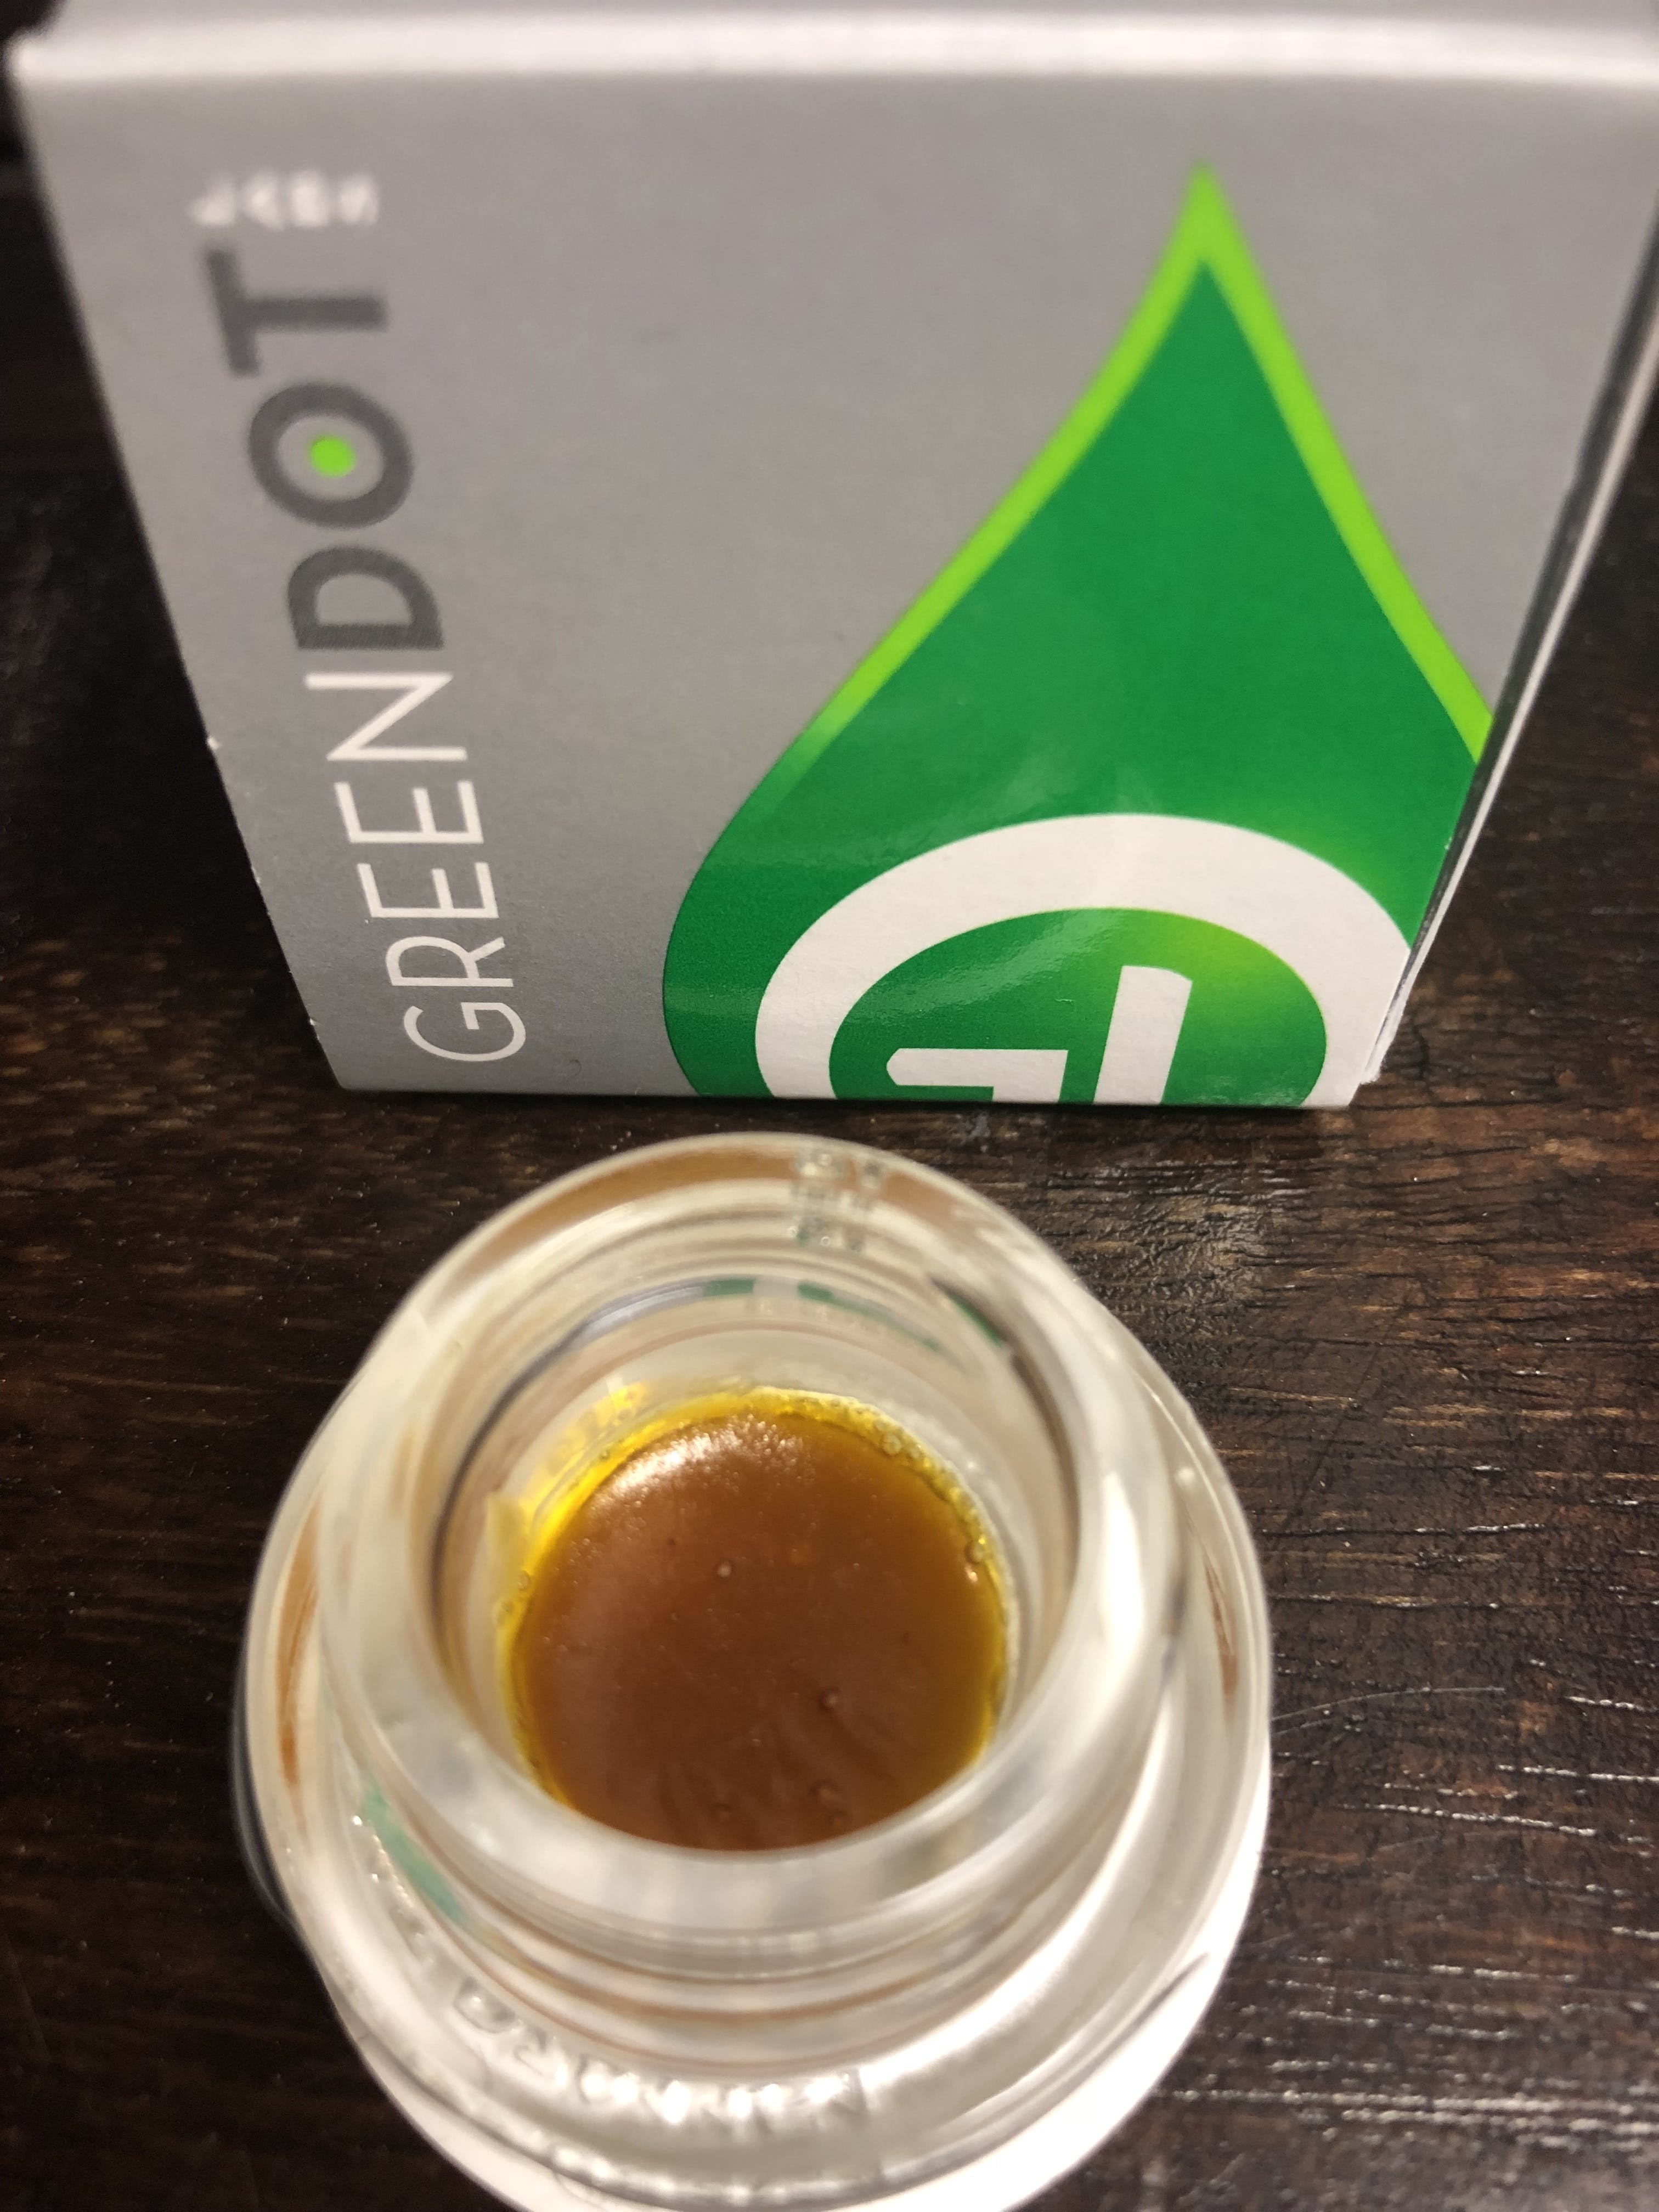 concentrate-med-green-dot-silver-label